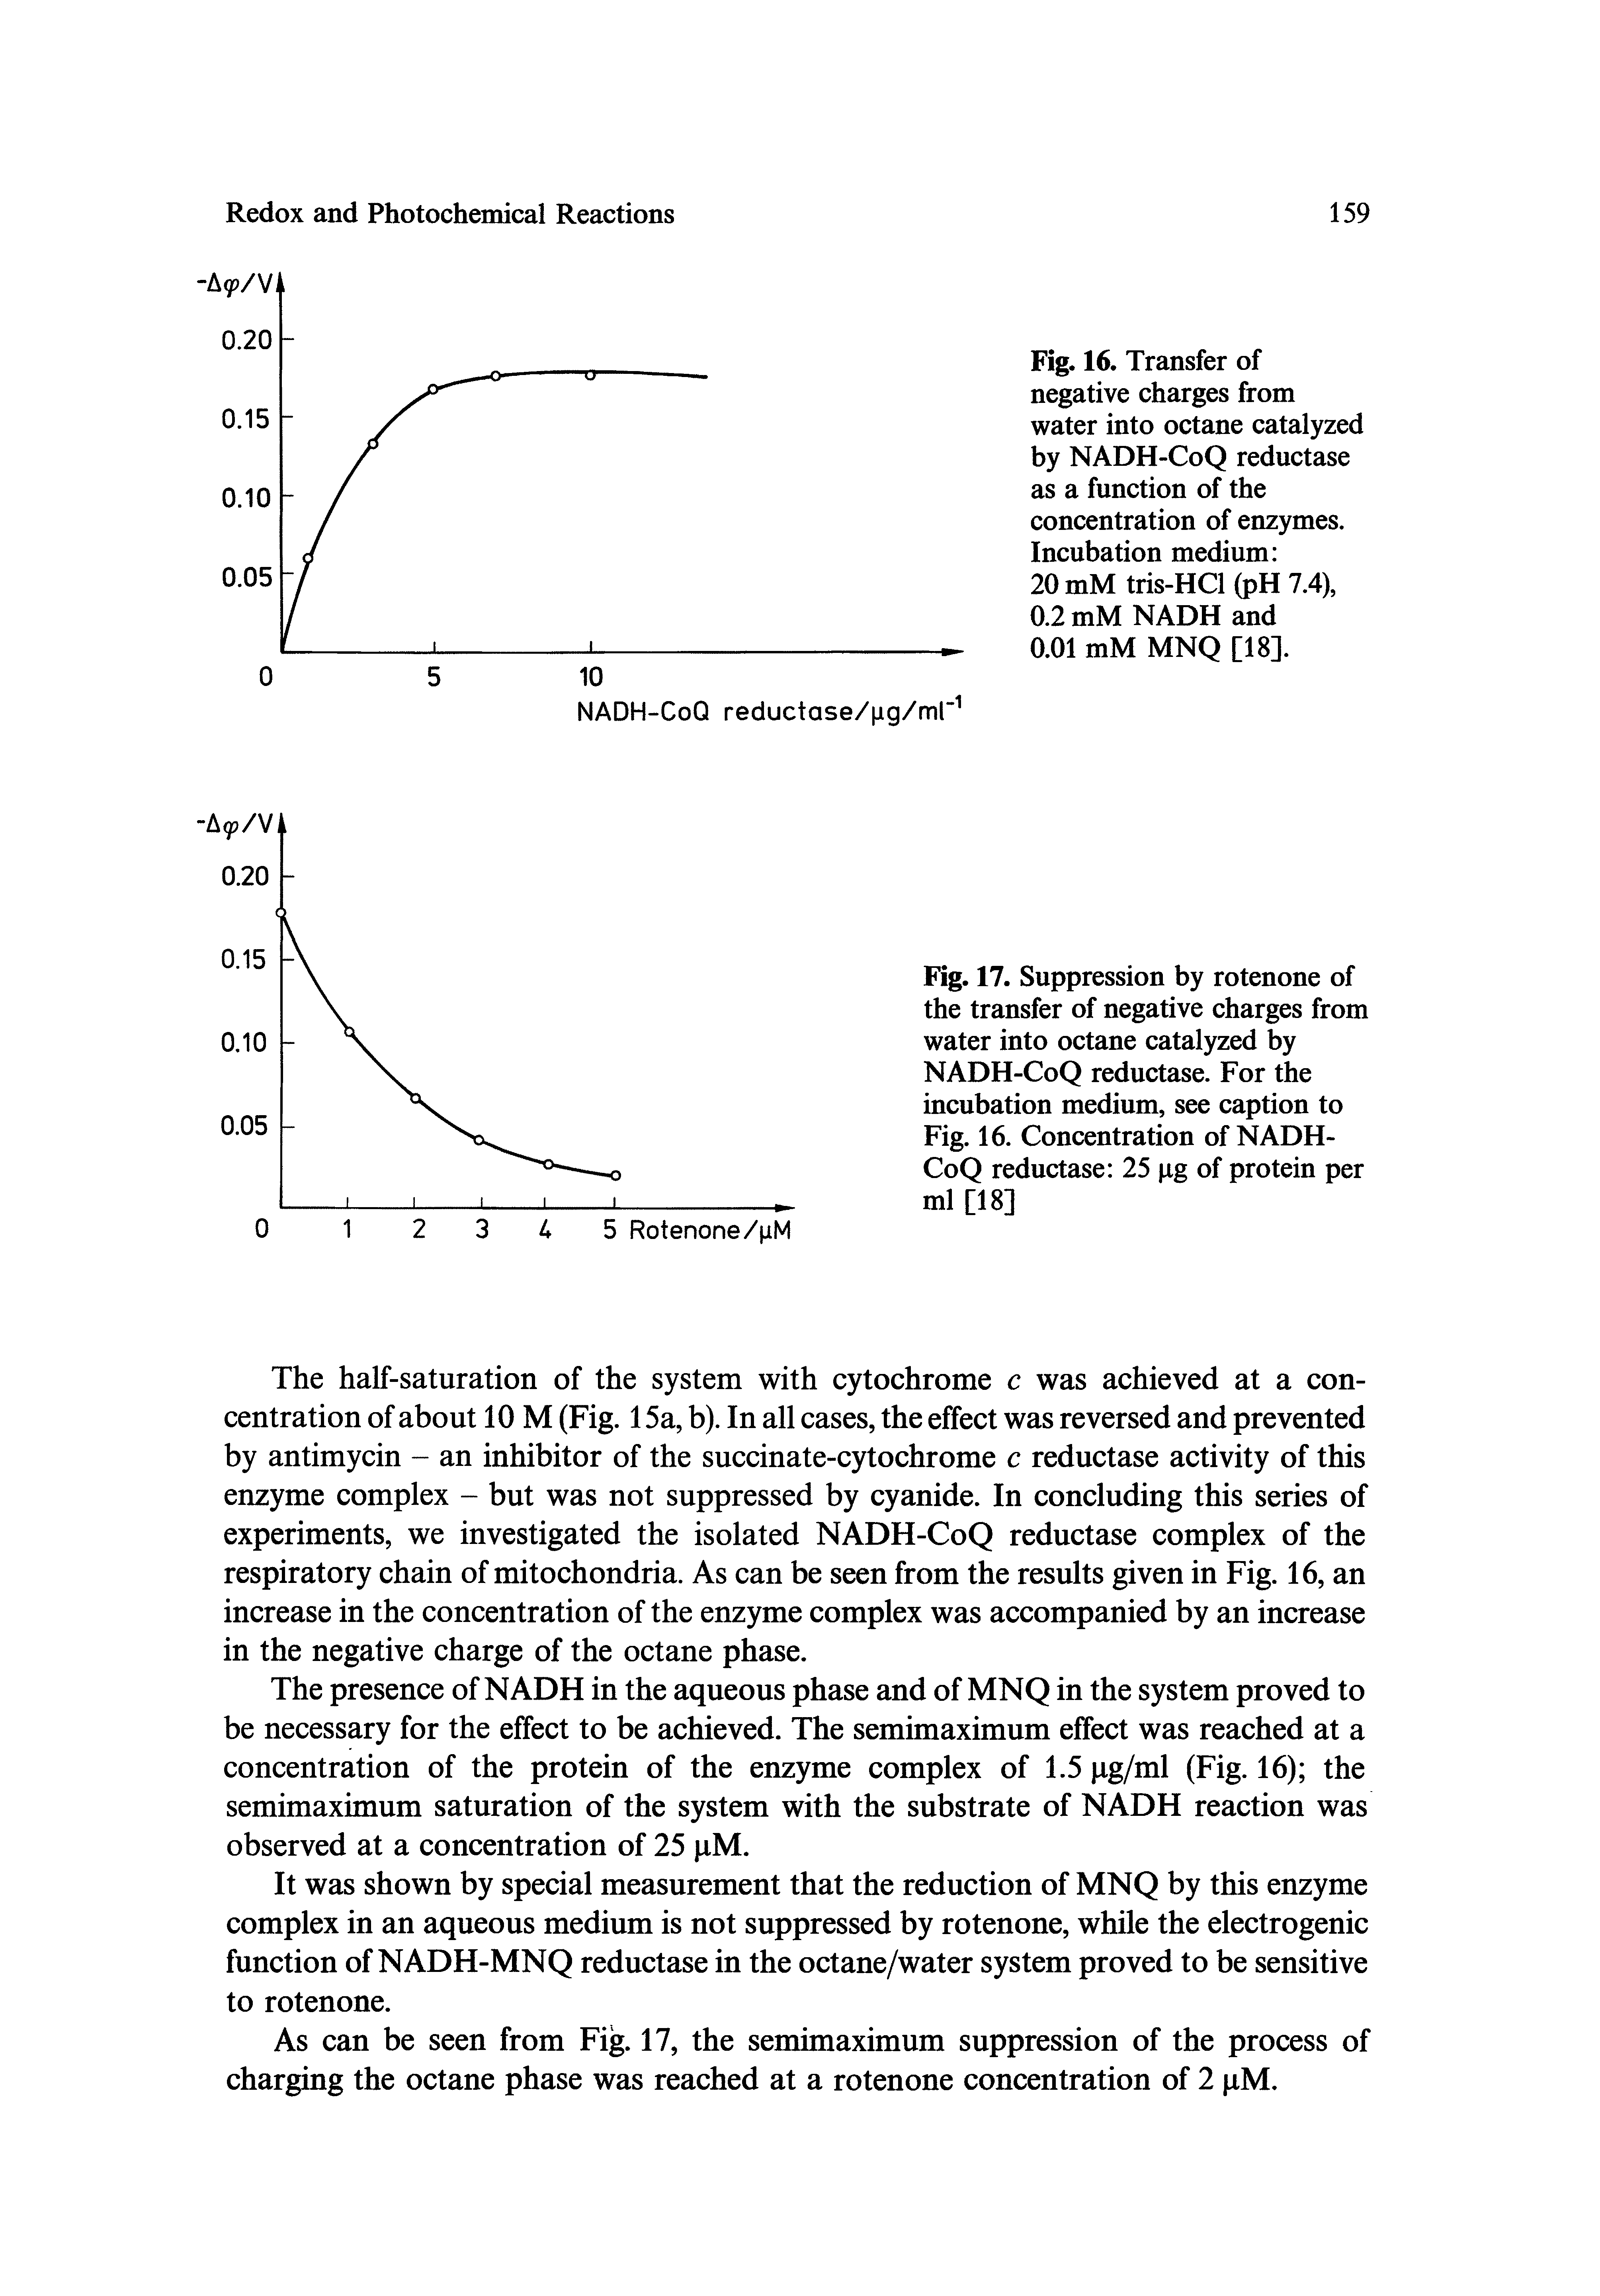 Fig. 16. Transfer of negative charges from water into octane catalyzed by NADH-CoQ reductase as a function of the concentration of enzymes. Incubation medium ...